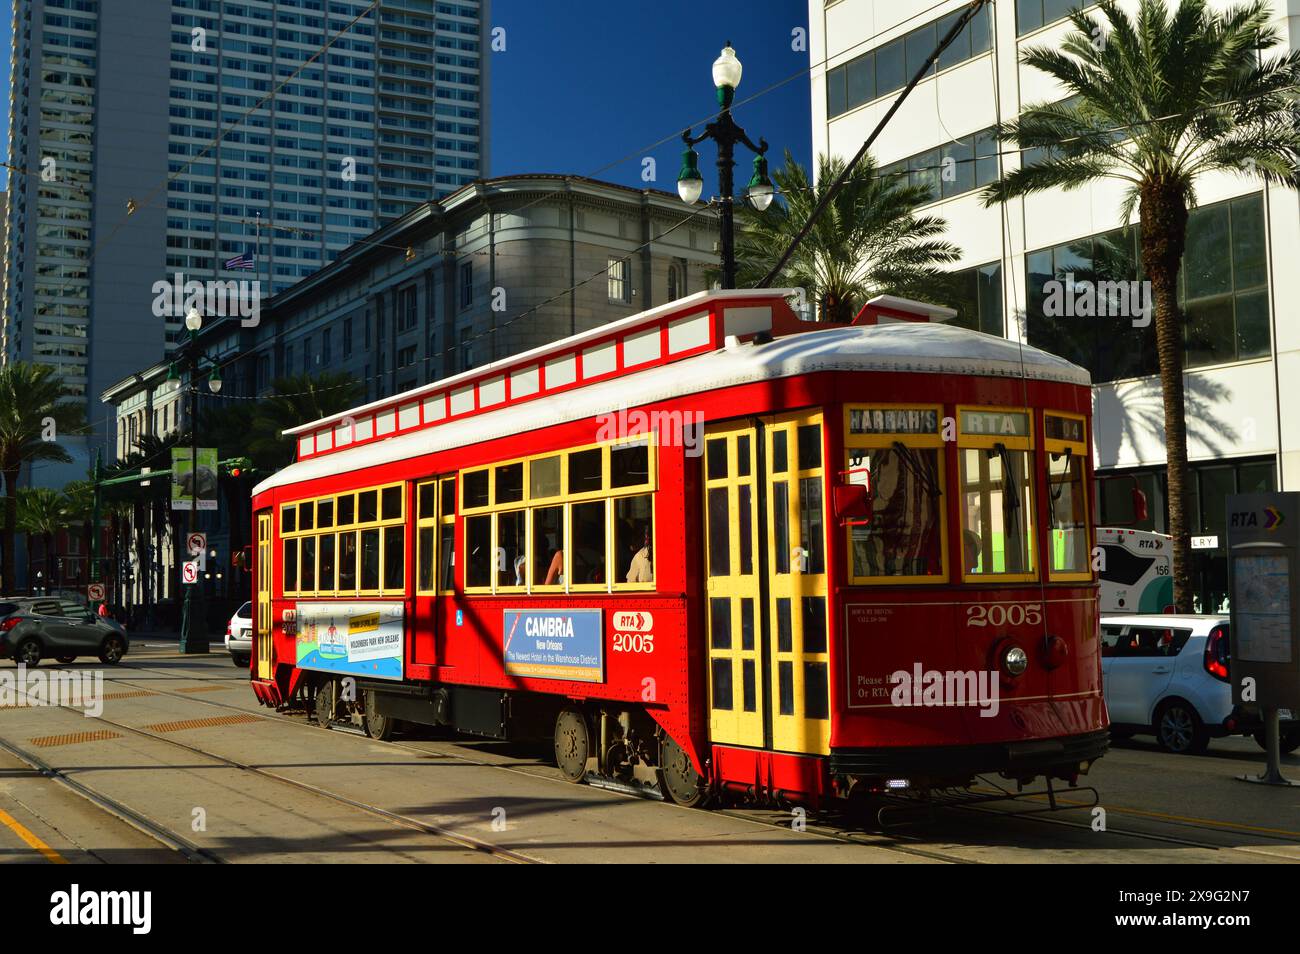 A red streetcar tram drives through the streets of downtown New Orleans carrying tourists and commuters to the French Quarter of New Orleans Stock Photo